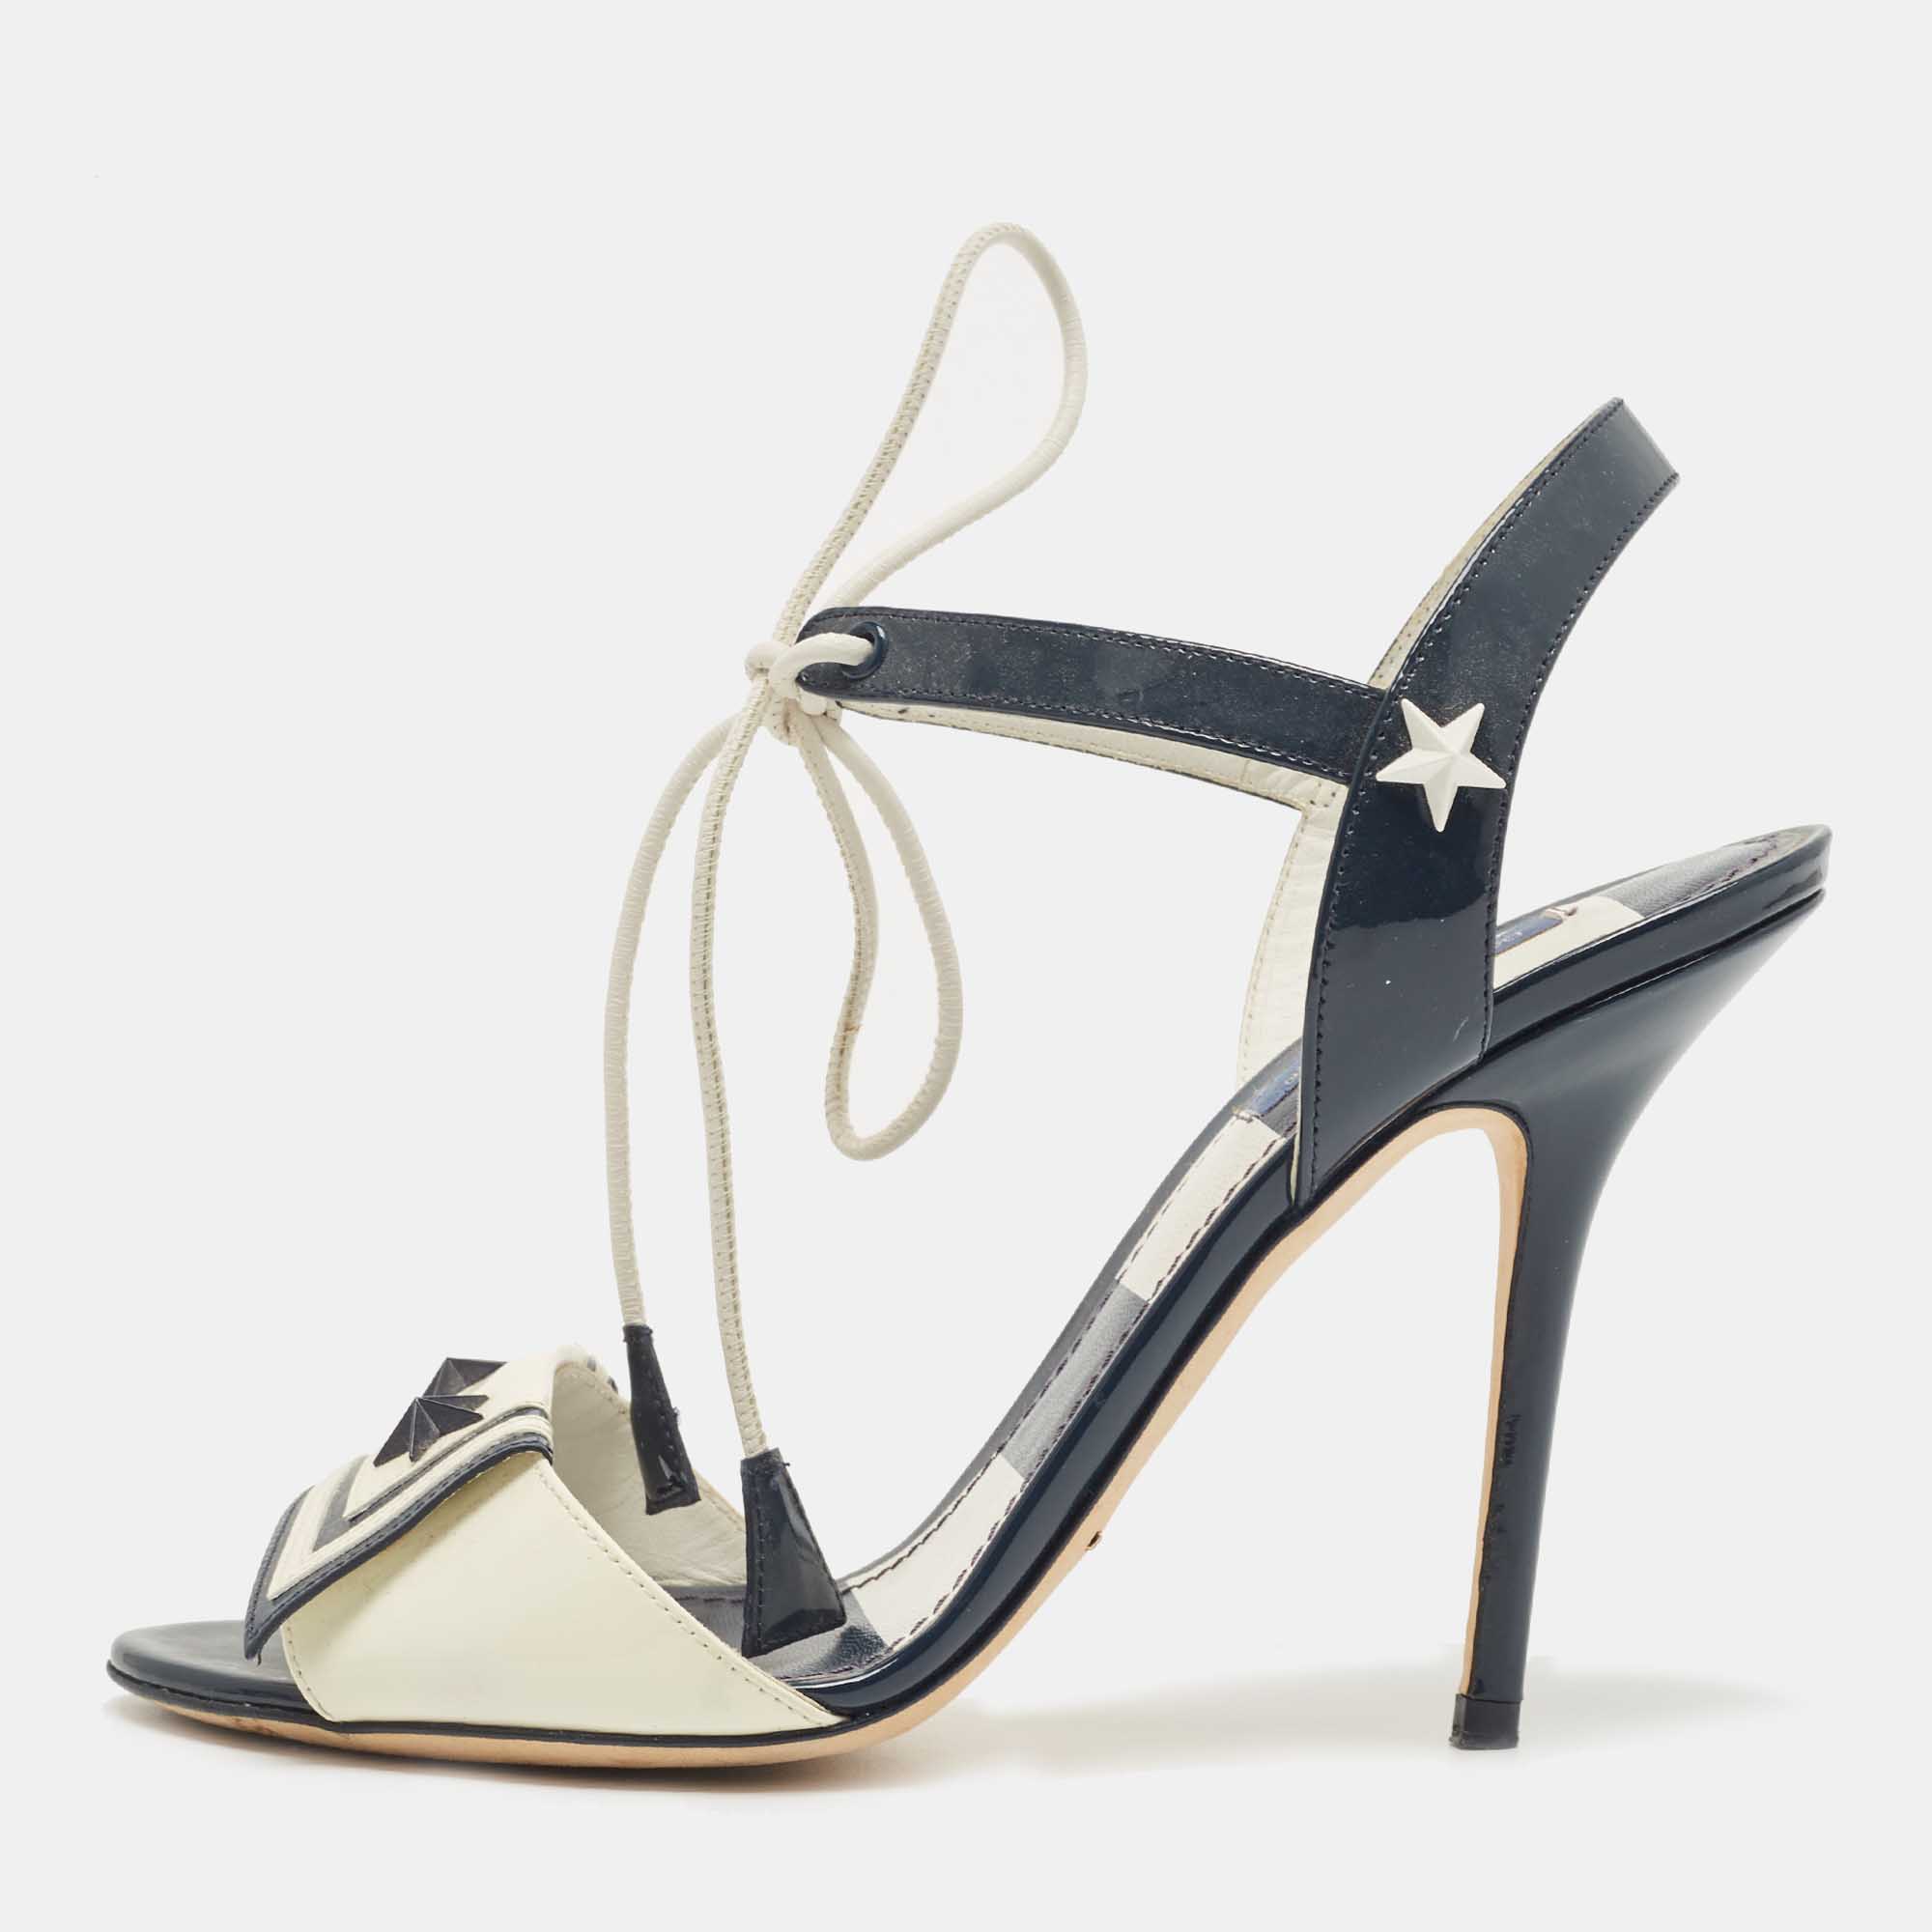 Dolce & Gabbana Navy Blue/Off White Patent Leather Ankle Tie Sandals Size 38